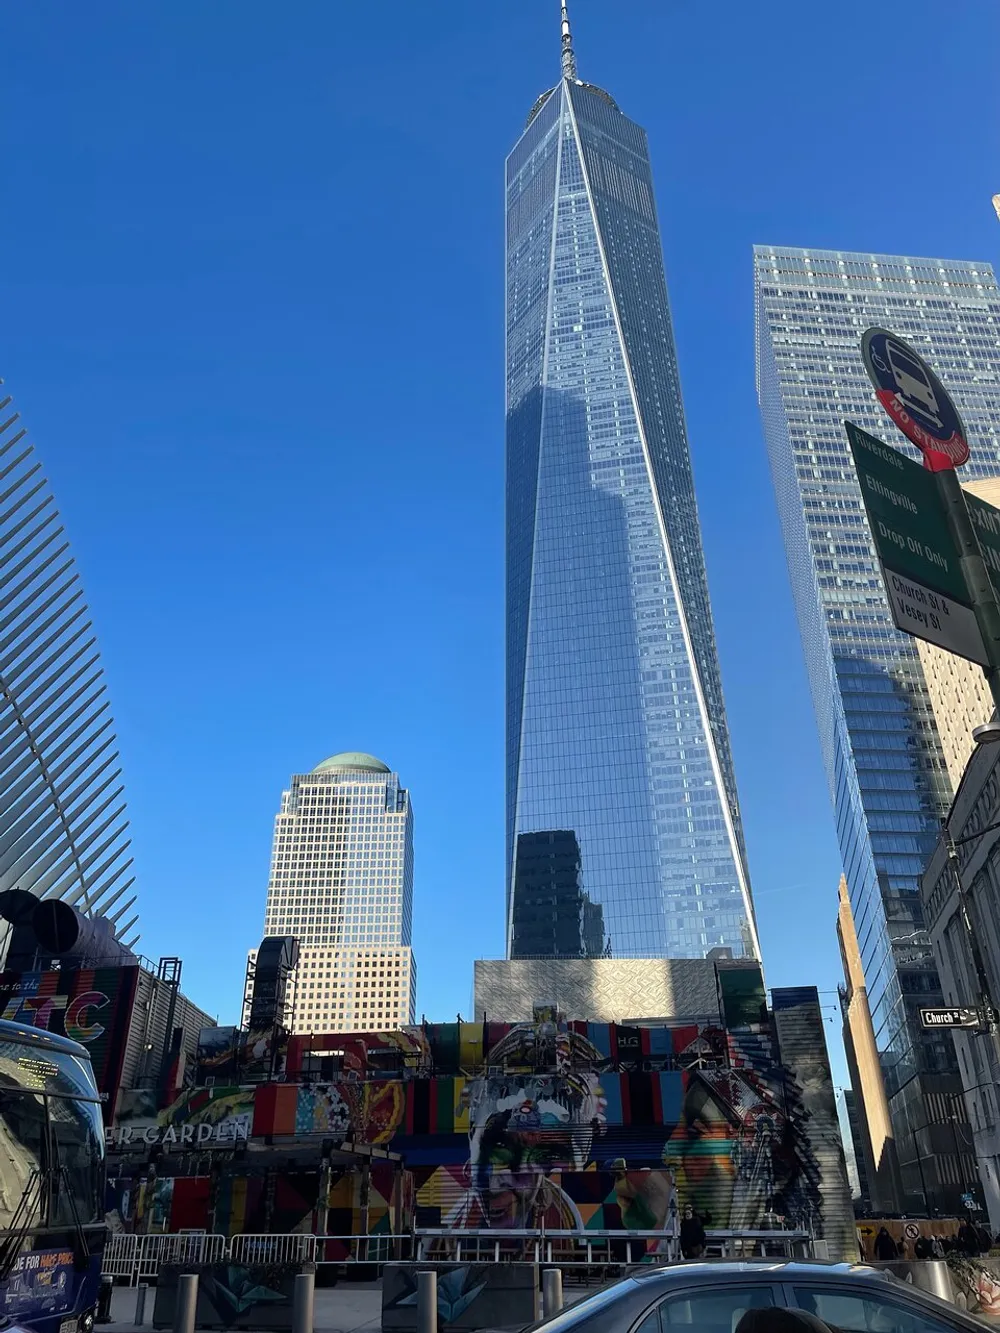 The image shows a bustling street scene with the towering One World Trade Center in the background under a clear blue sky